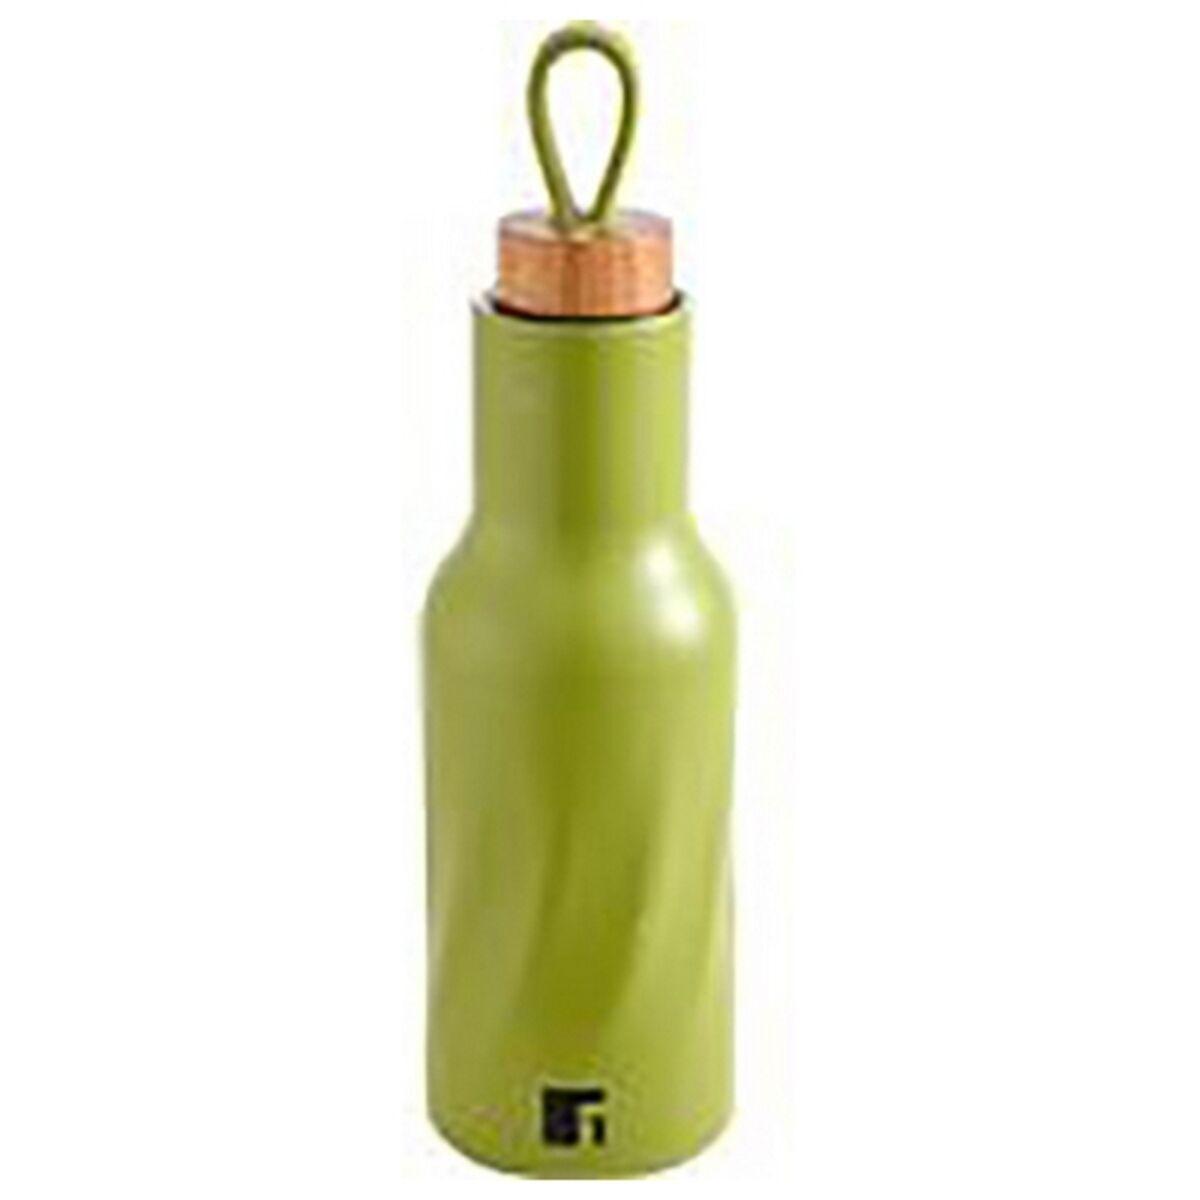 Thermos Bergner Green Stainless steel (500 ml) - VirtuousWares:Global